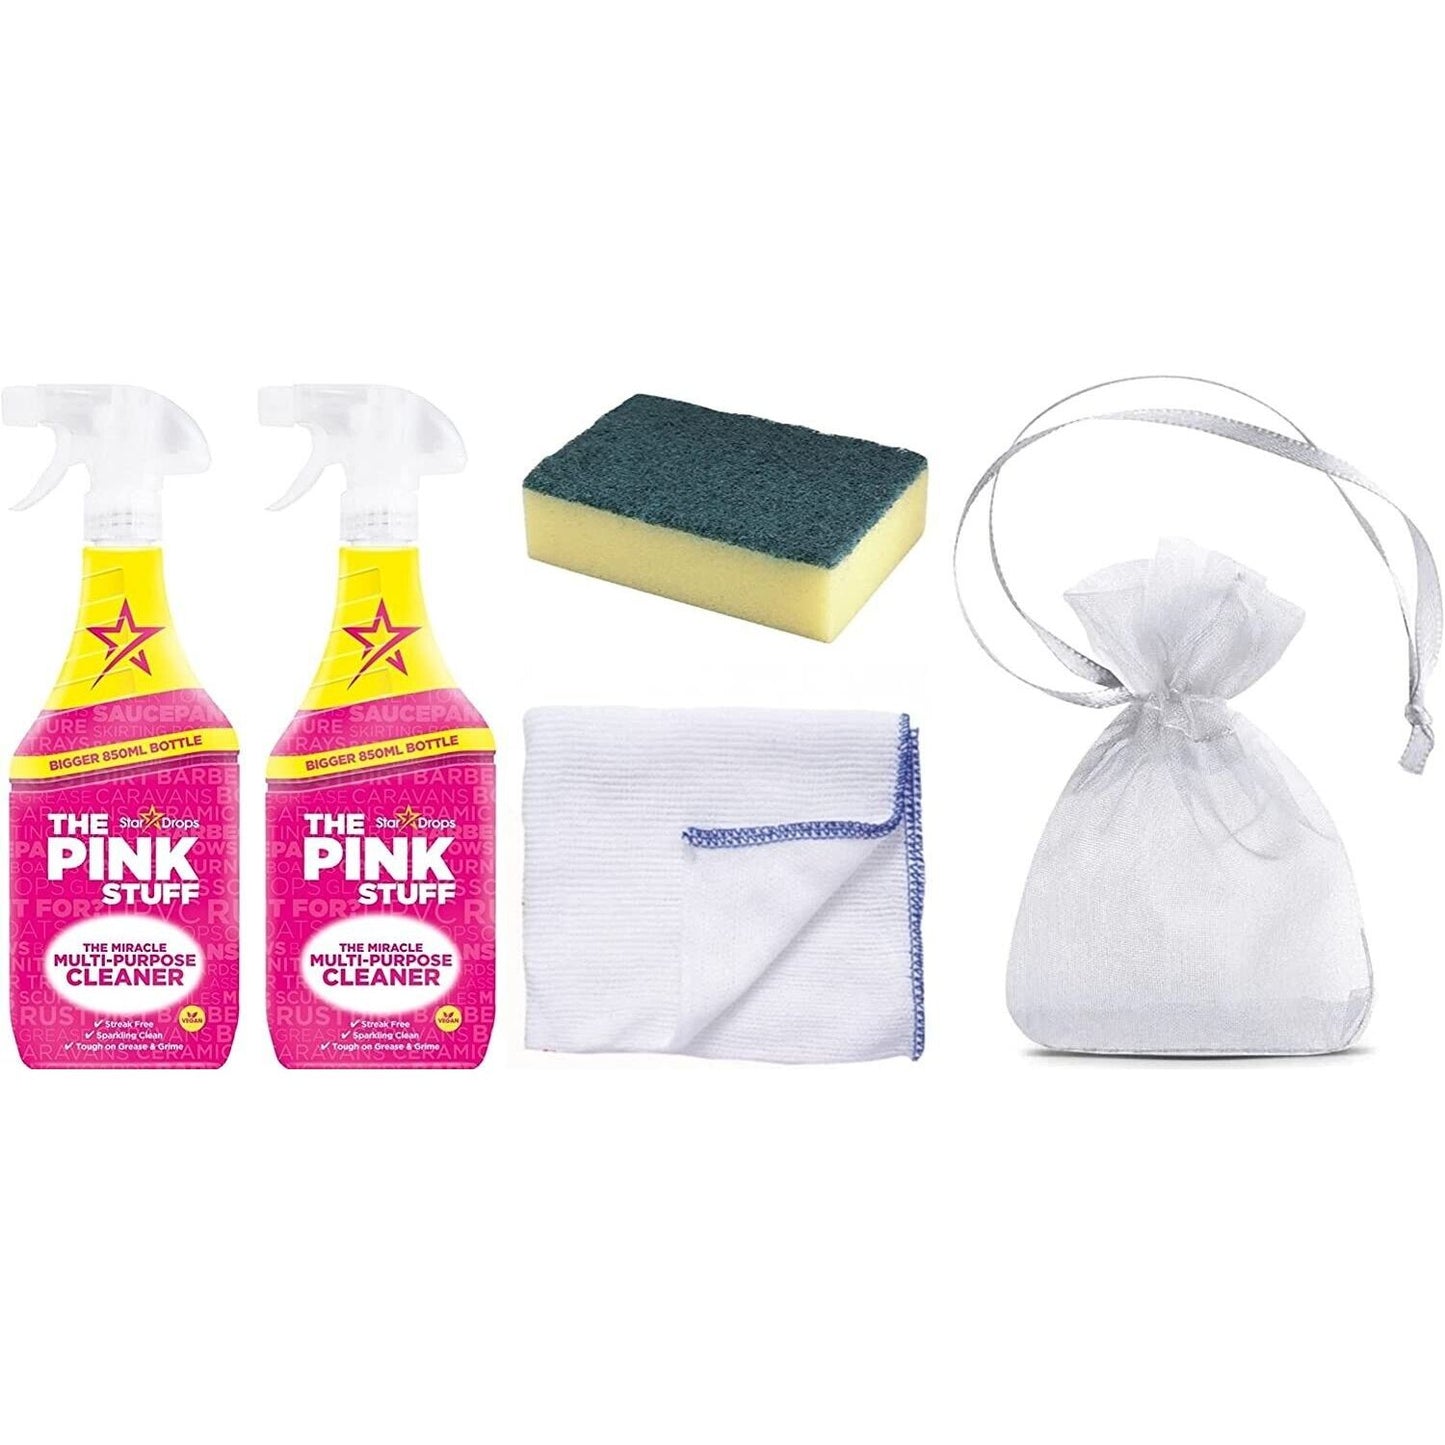 2 x The Pink Stuff, The Miracle Cleaner Spray 850ml +Sponges+Cleaning Cloth